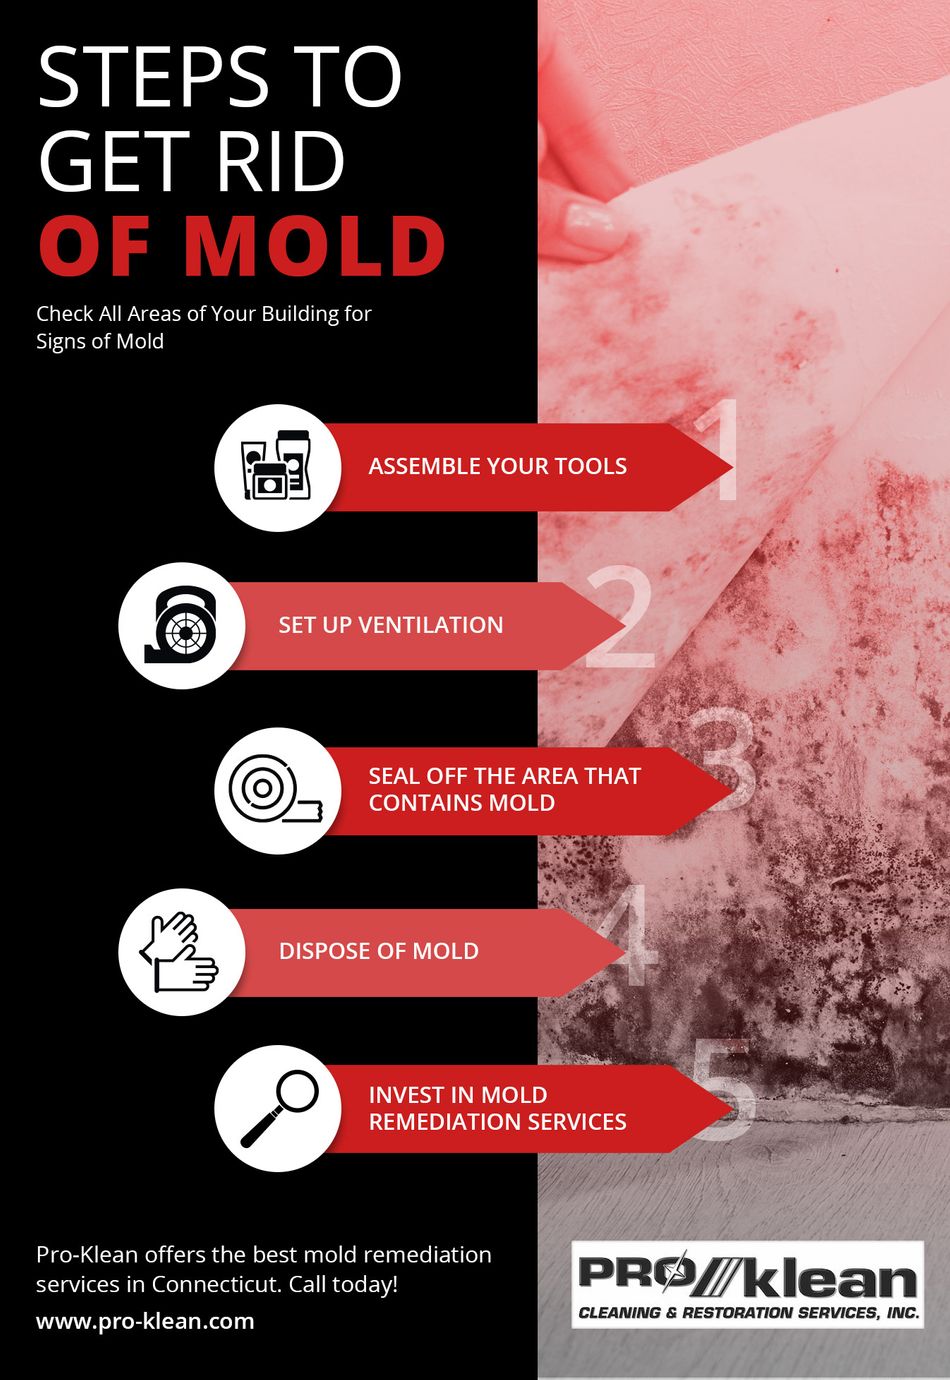 Steps to get rid of mold.jpg